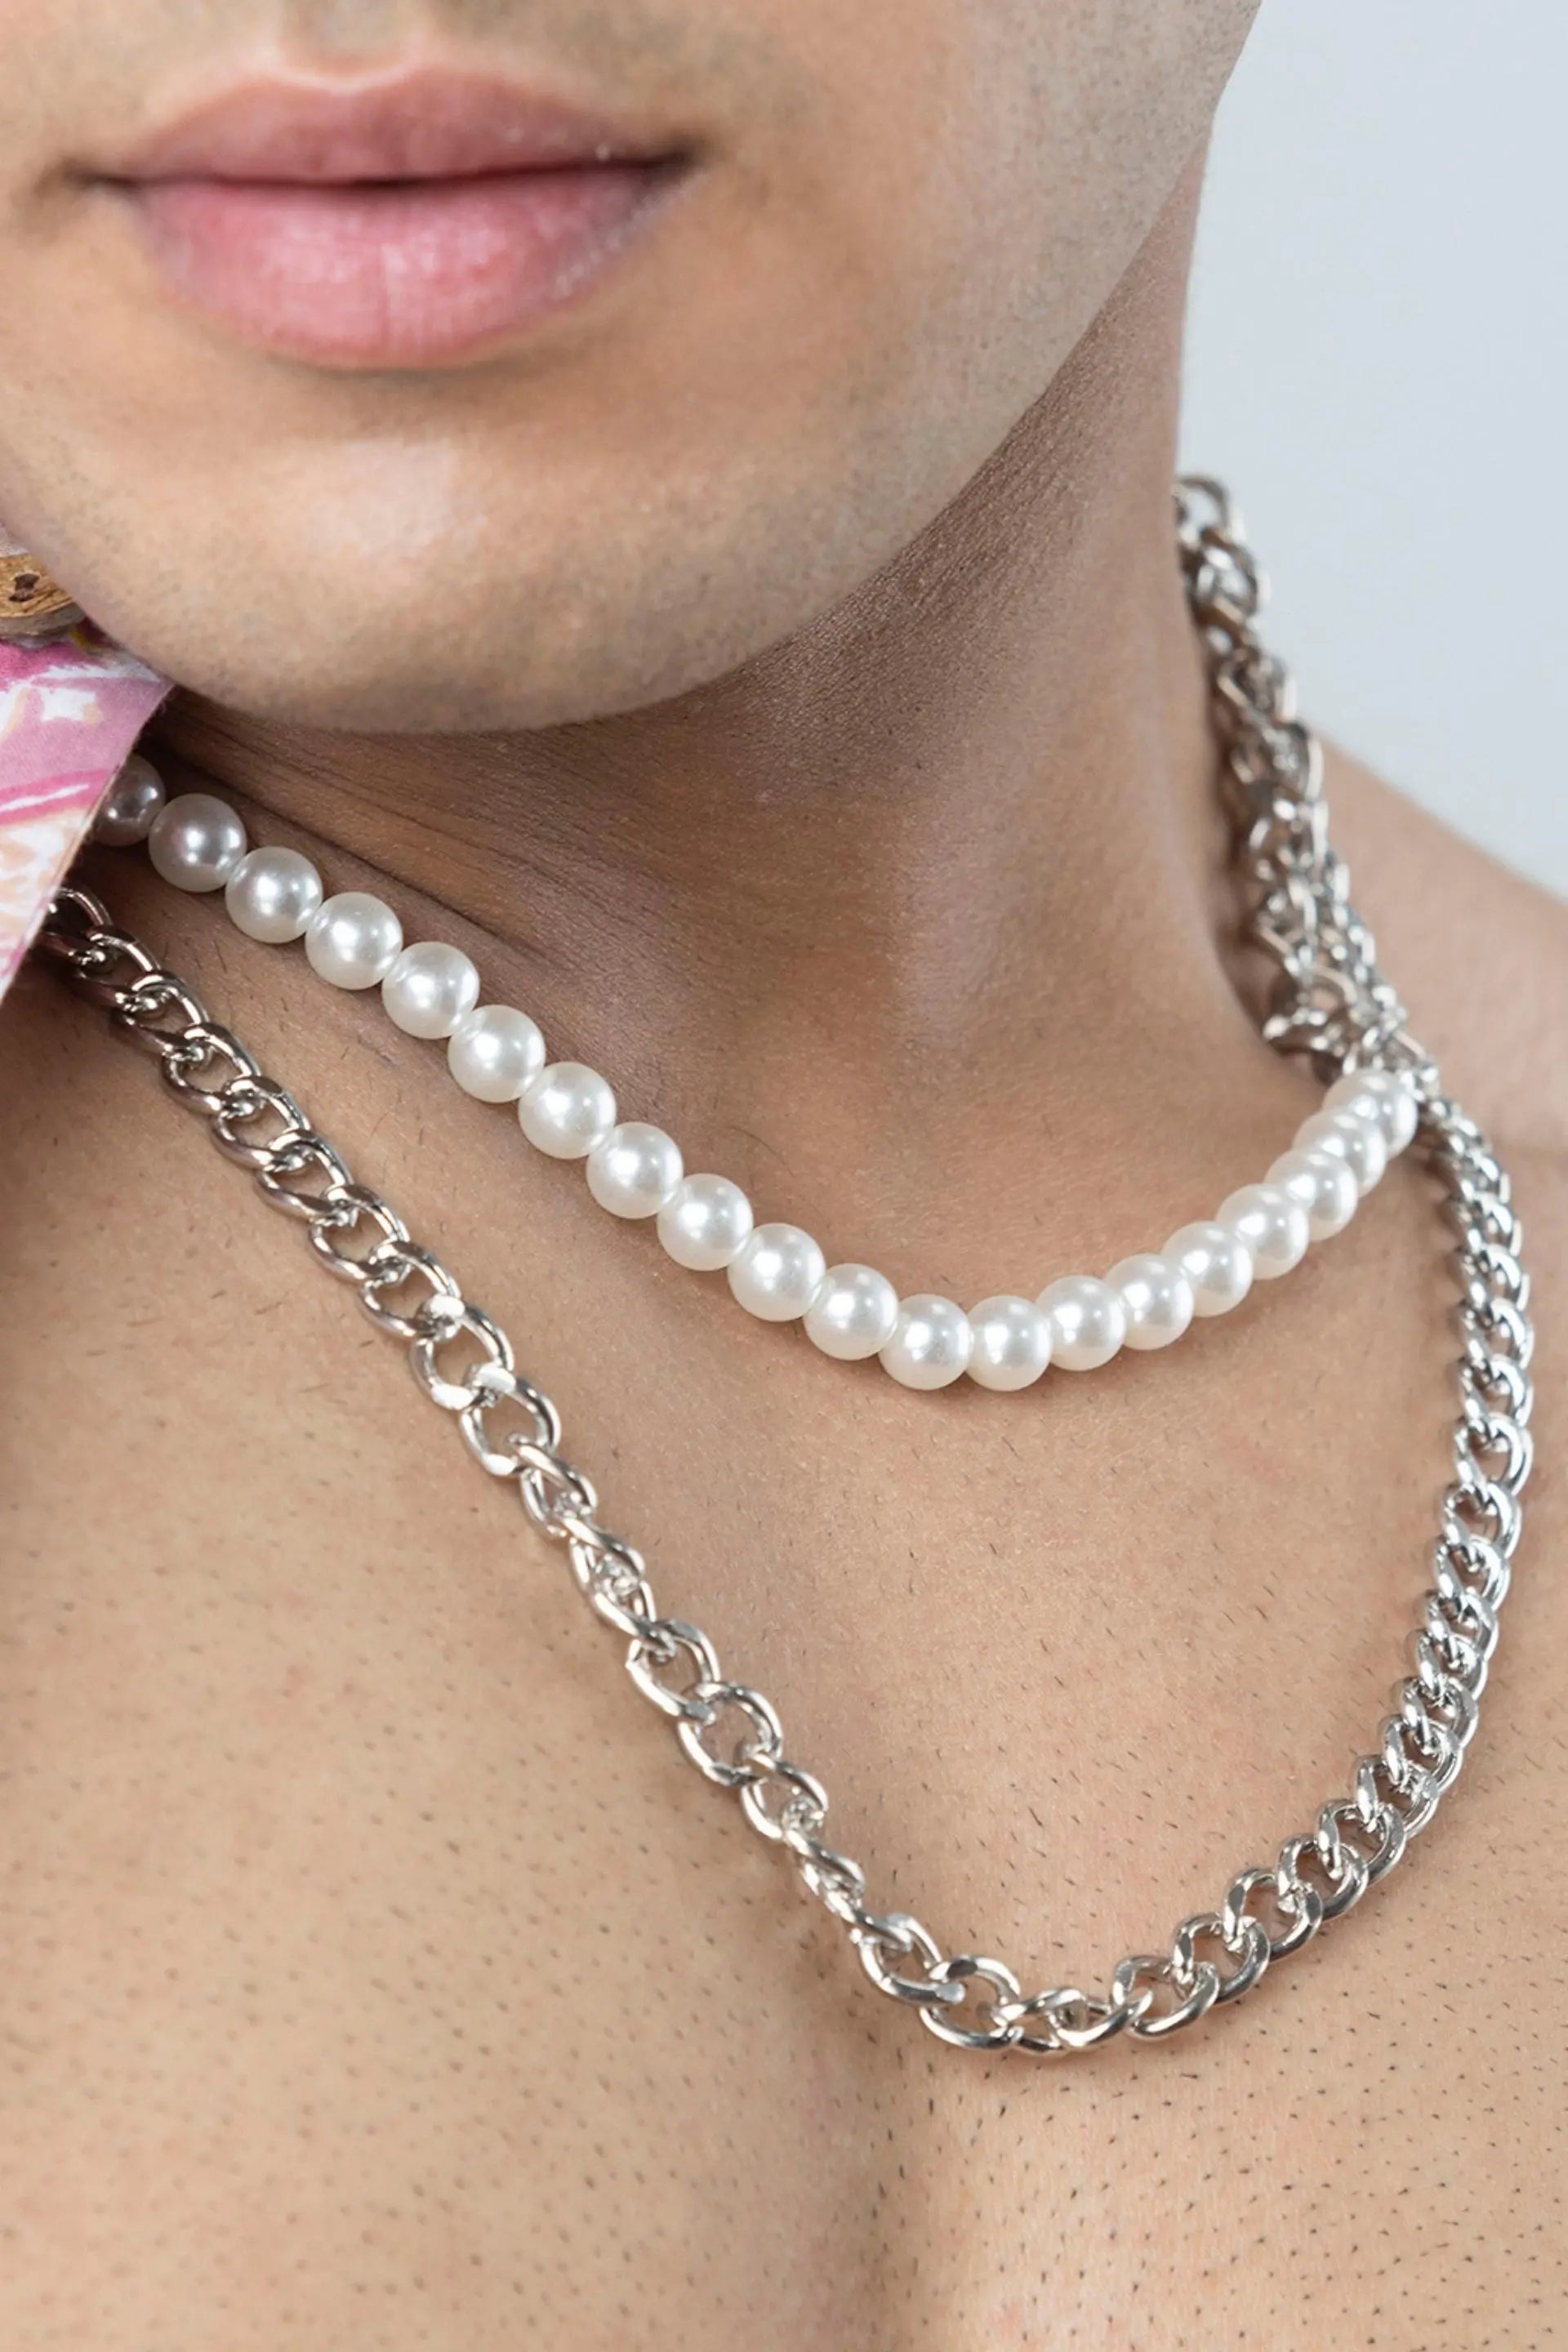 Classic Pearl Bead Necklace Simple Two Layer Link Chain Necklace